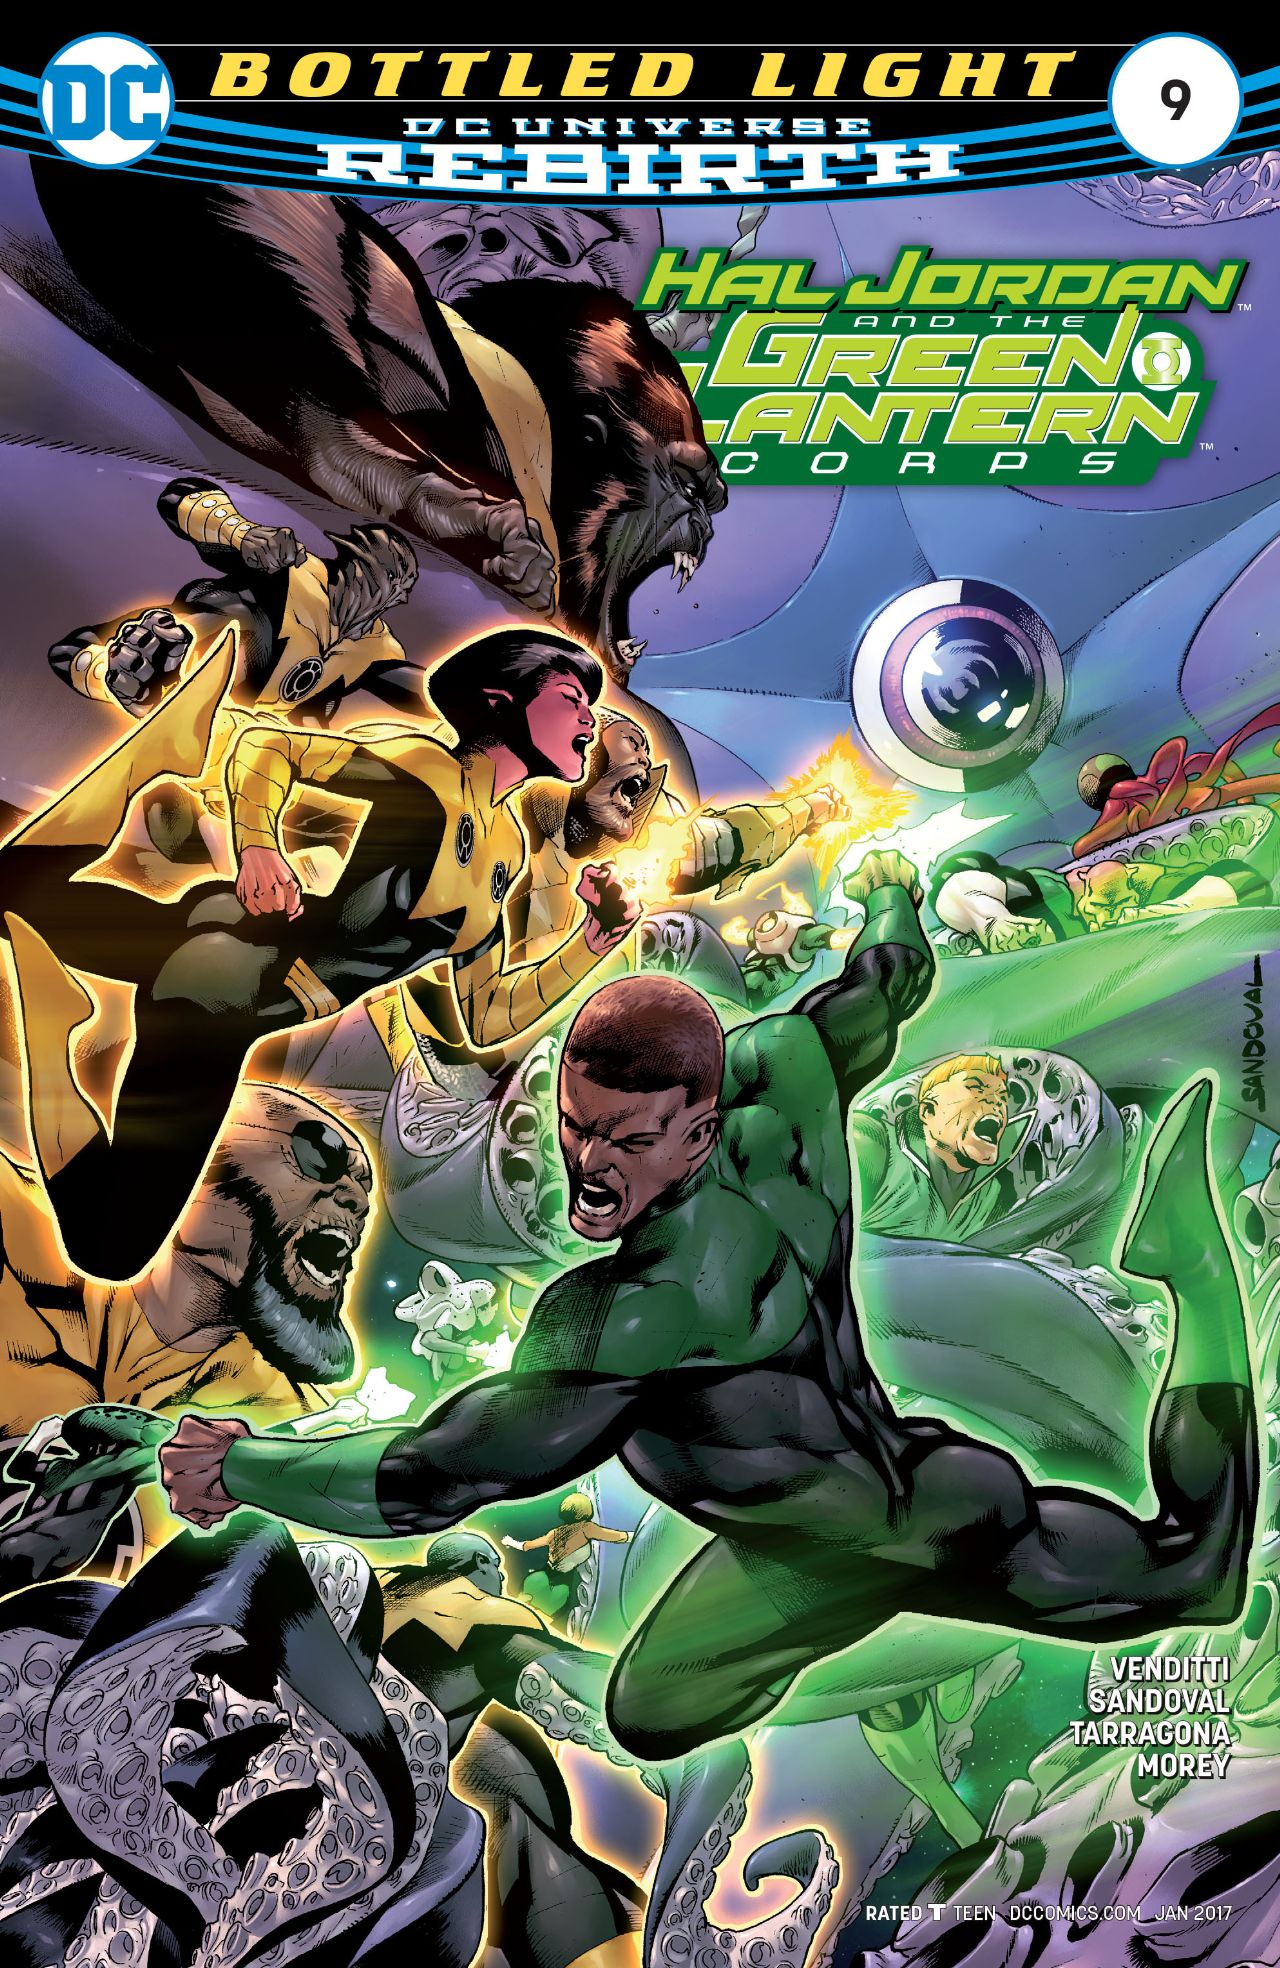 Hal Jordan and the Green Lantern Corps #9 Review